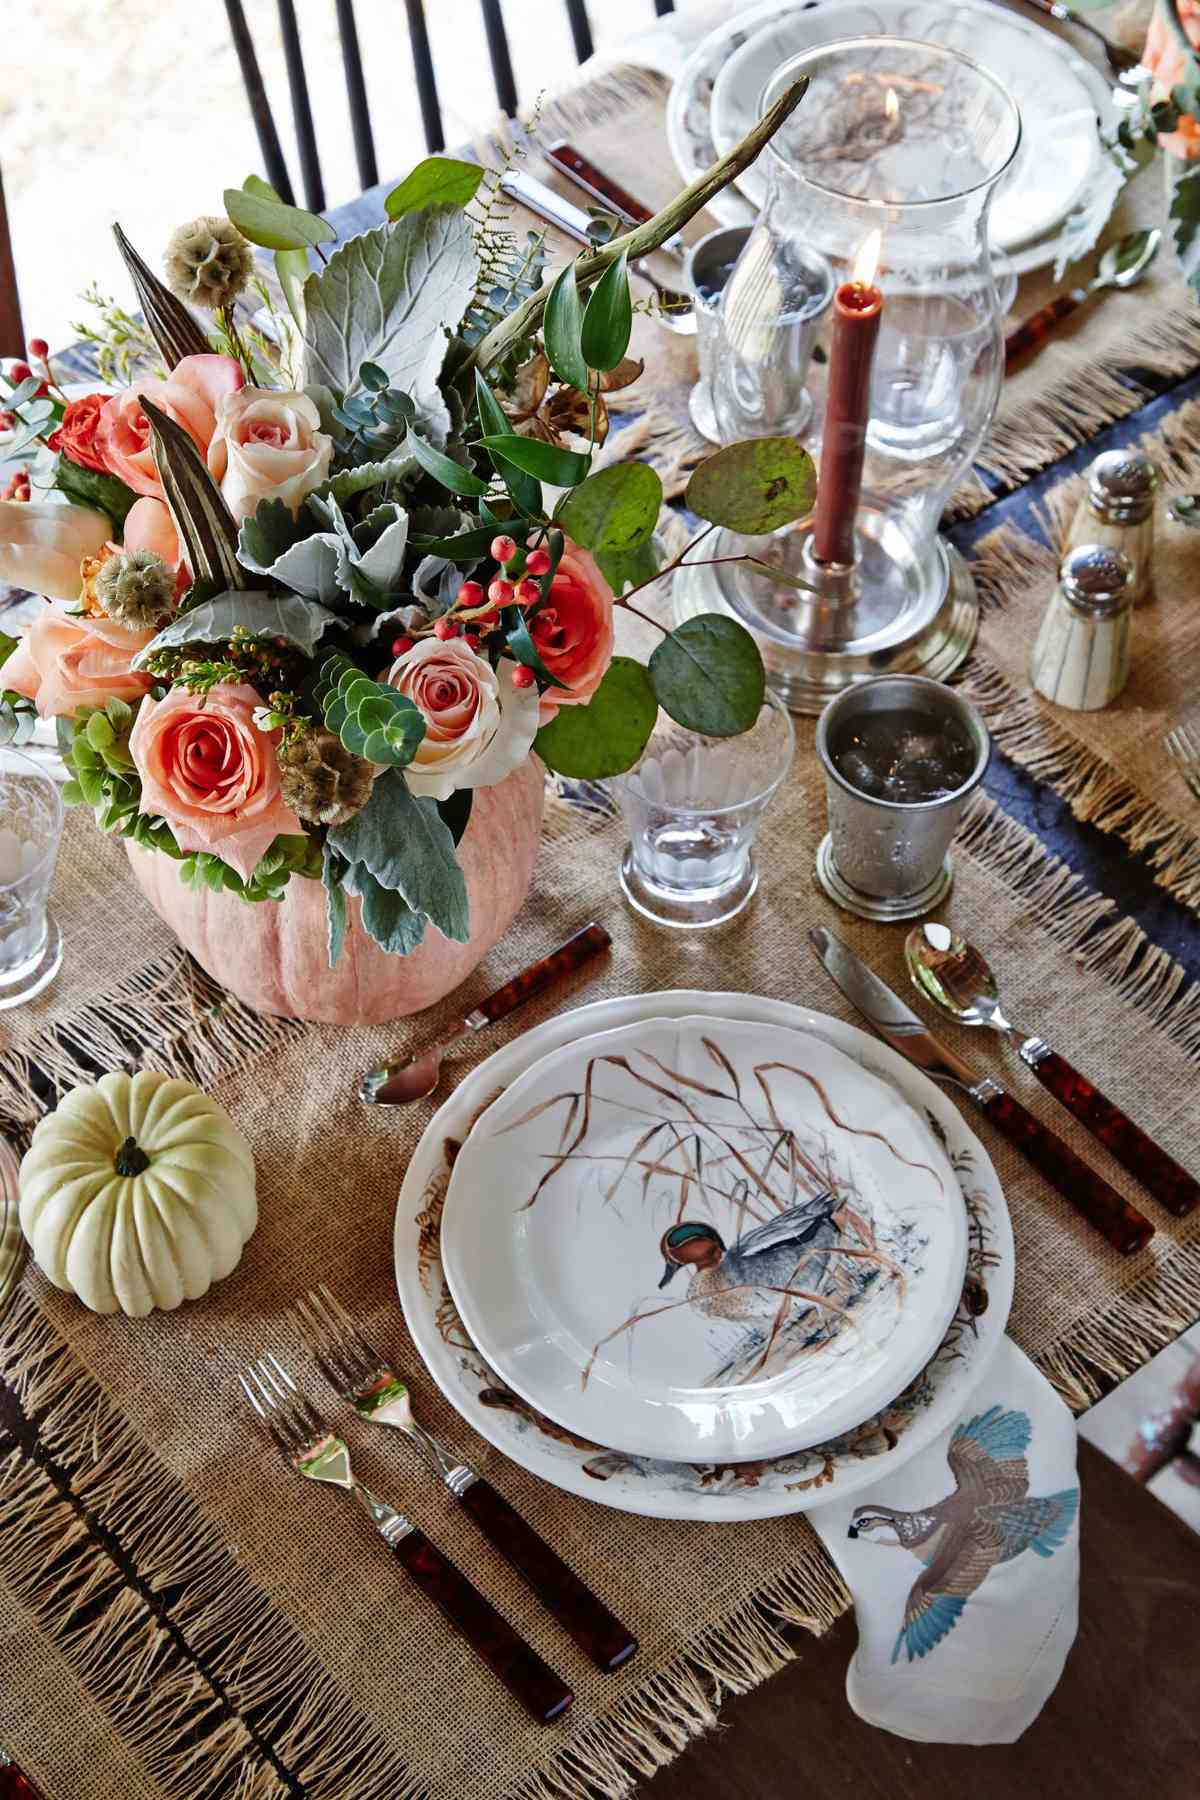 18 Thanksgiving Table Ideas for a Festive Dinner   Southern Living